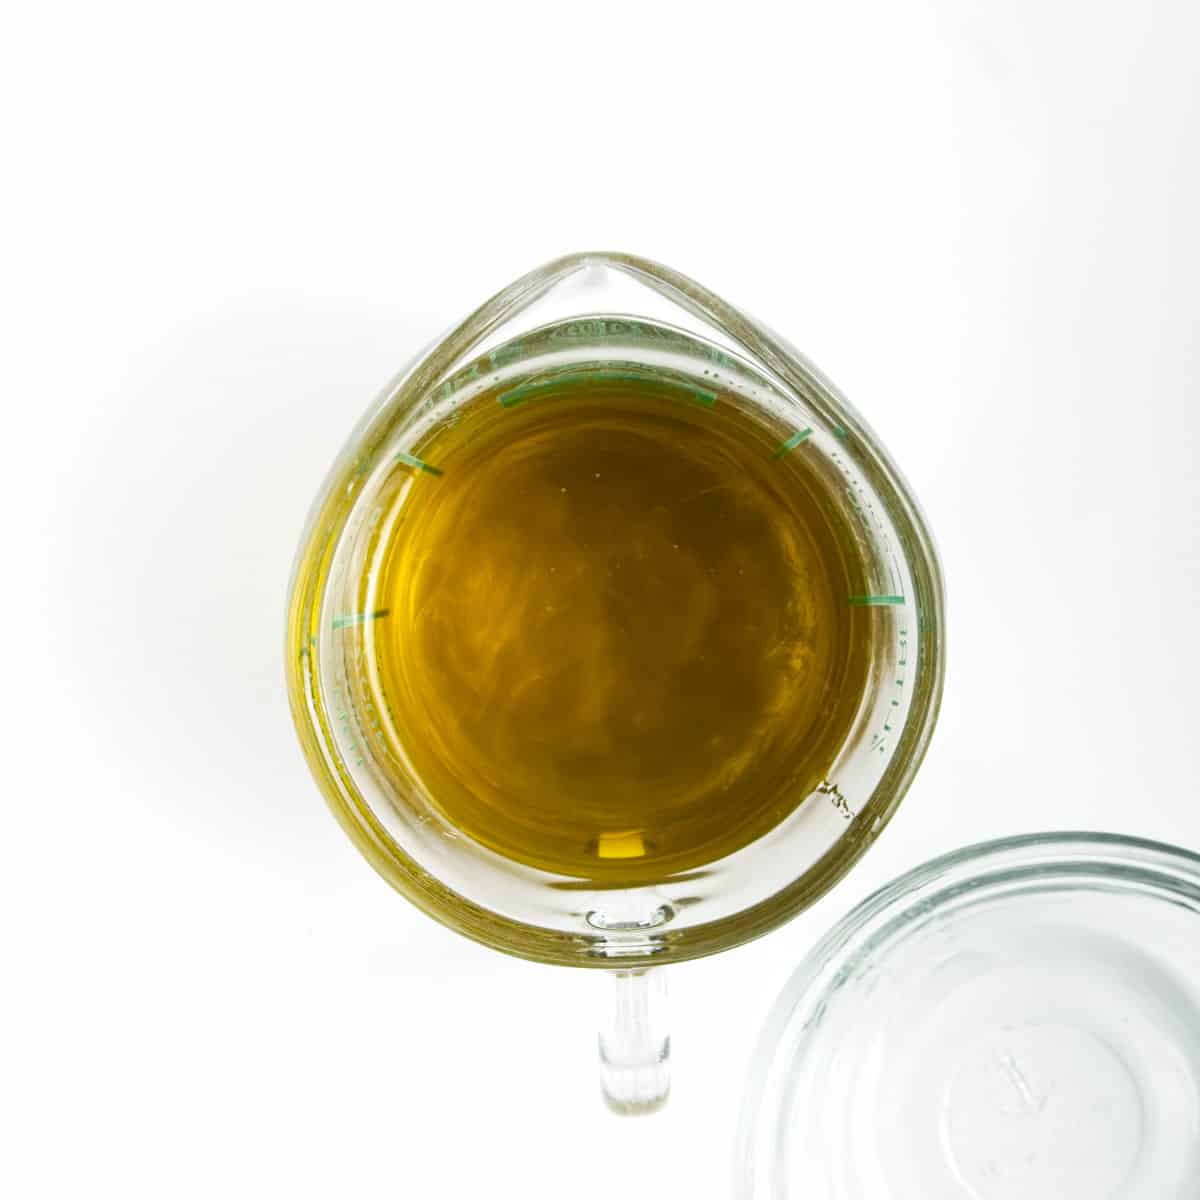 Olive oil and vegetable oil mixed together in a measuring cup.